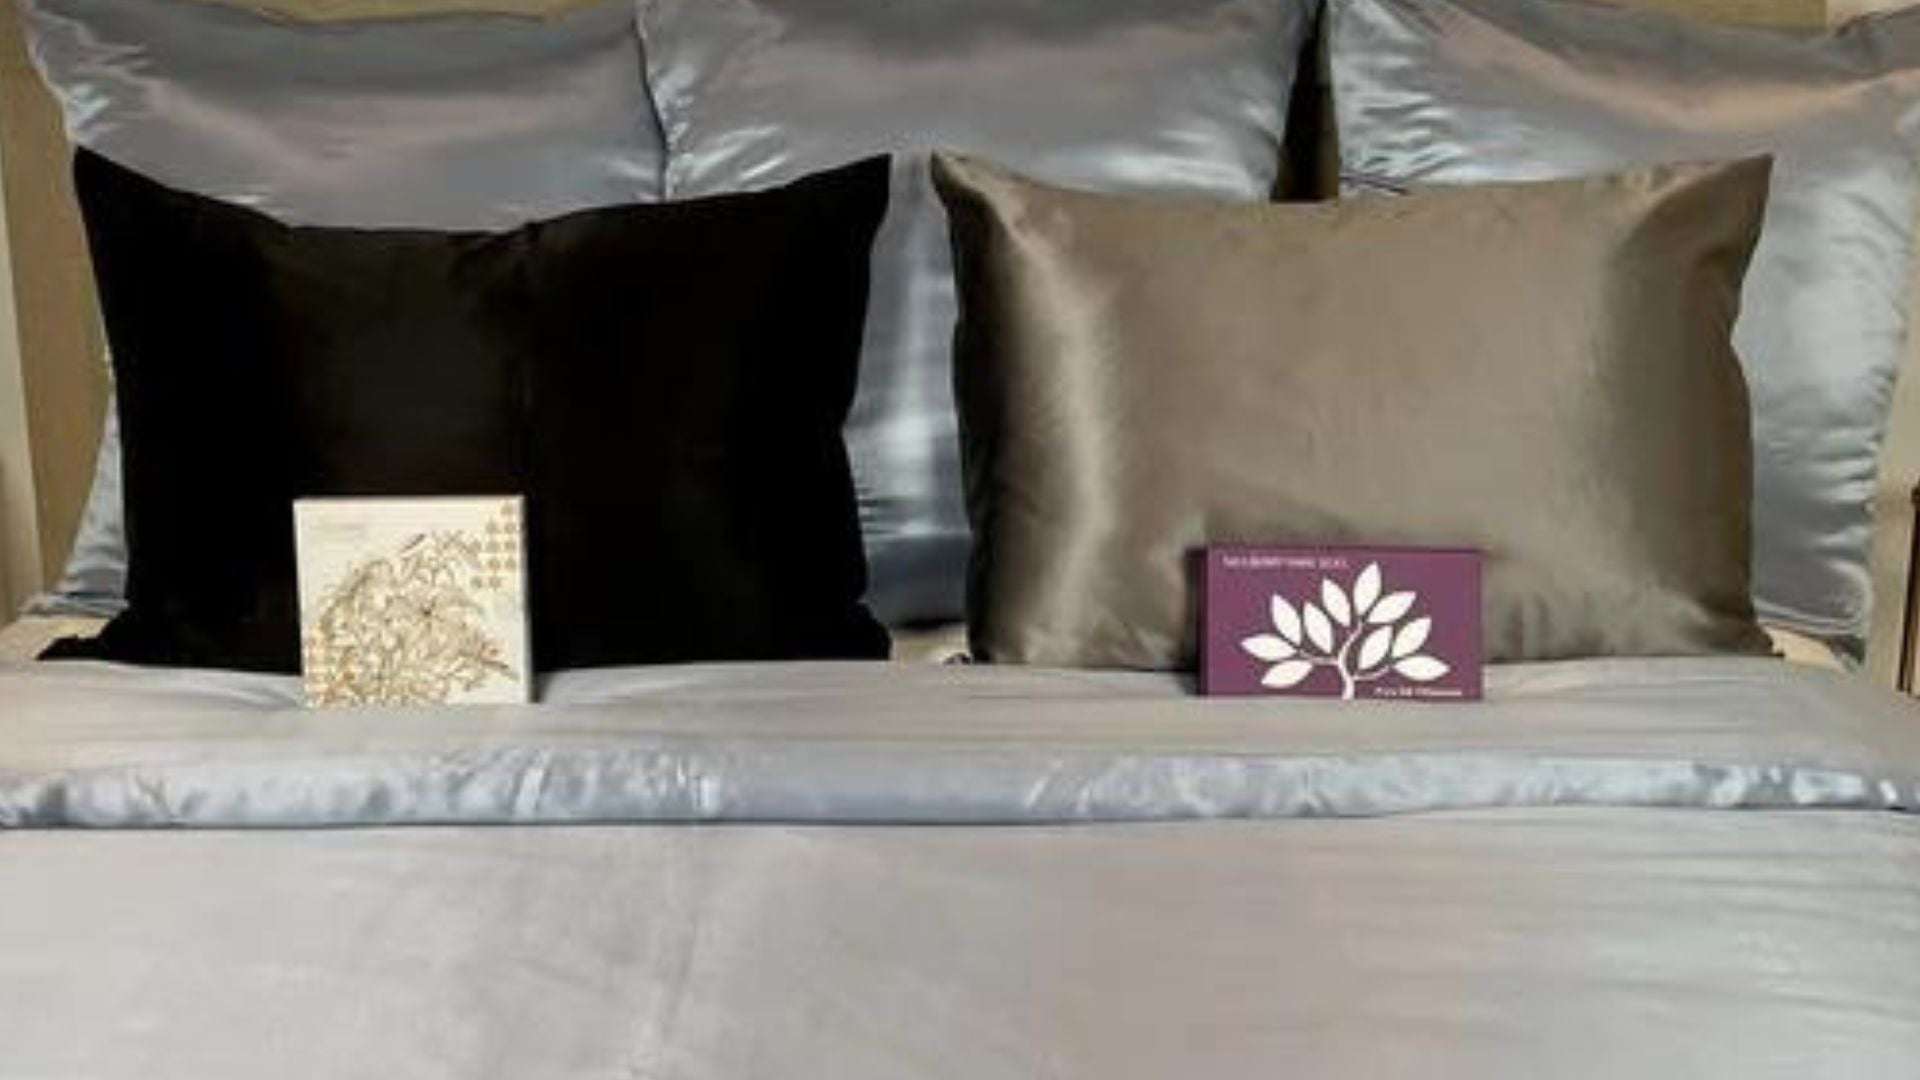 Silk Pillowcases and Sheets Product Review: Mulberry Park Silks vs. Lilysilk